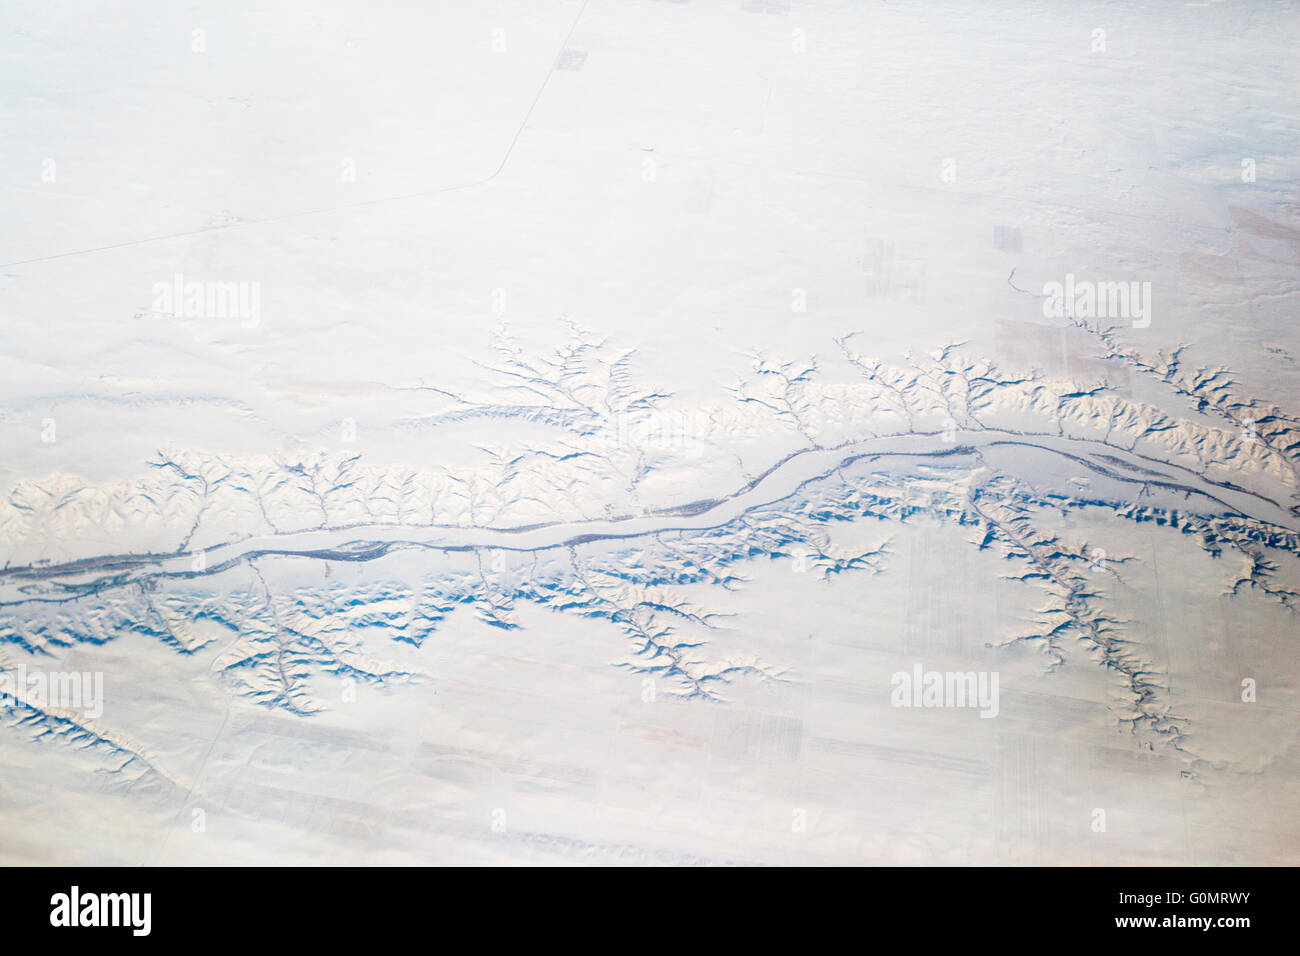 Dendritic river drainage pattern in snow covered prairie landscape, aerial view Stock Photo